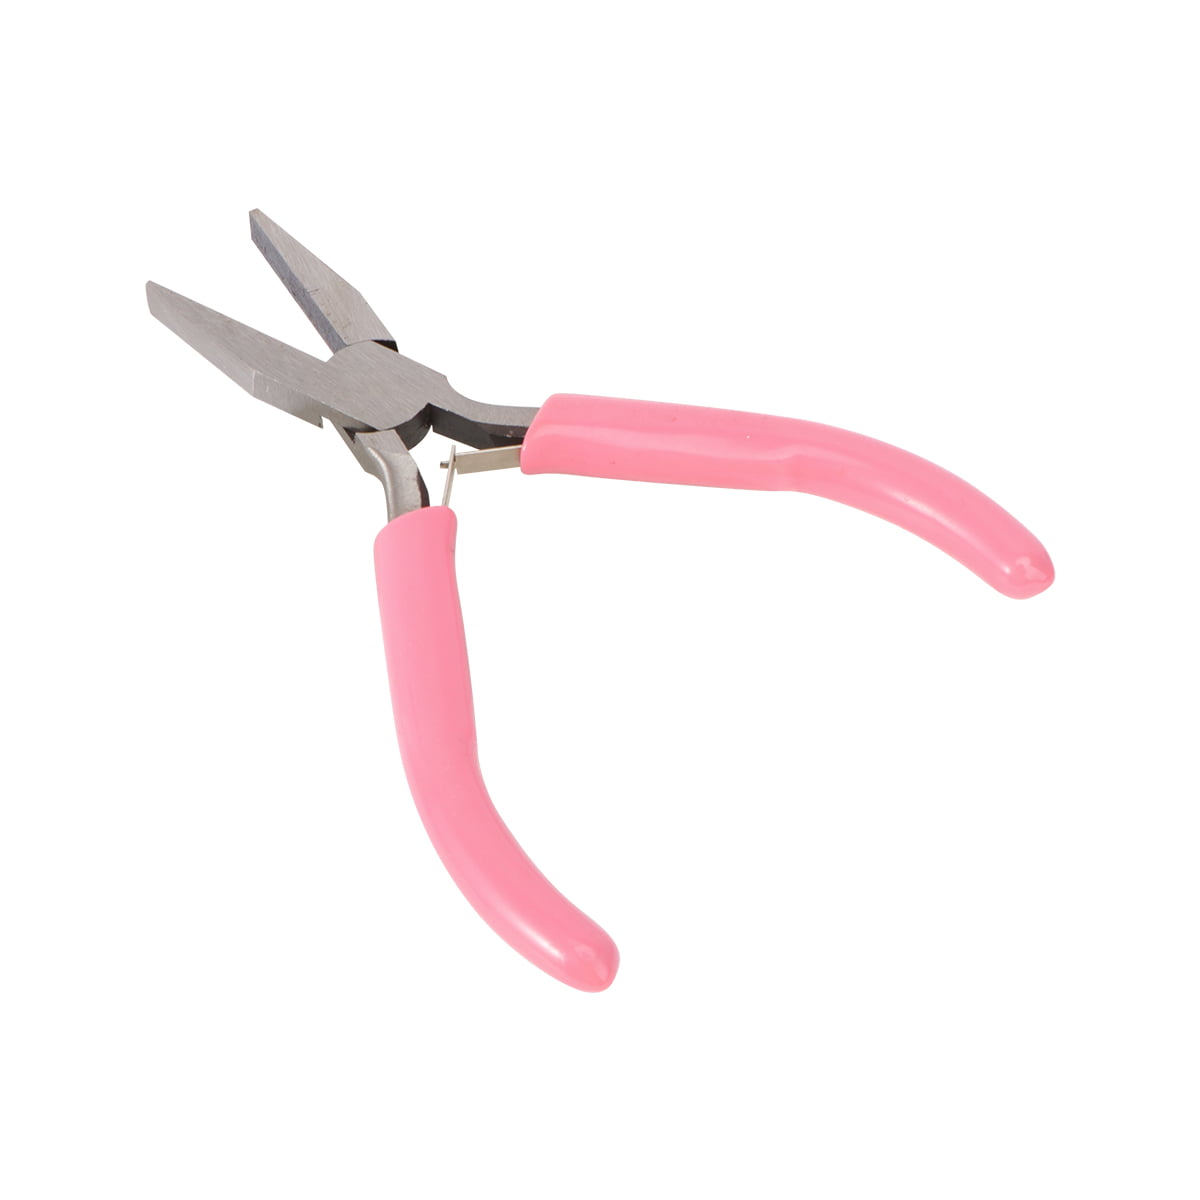 Pink Jewelry Pliers Tool & Equipment for KitsRound Nose Plier Side Tweezers  Mix Needle Spoon Tool DIY Metal Jewelry Making Tools